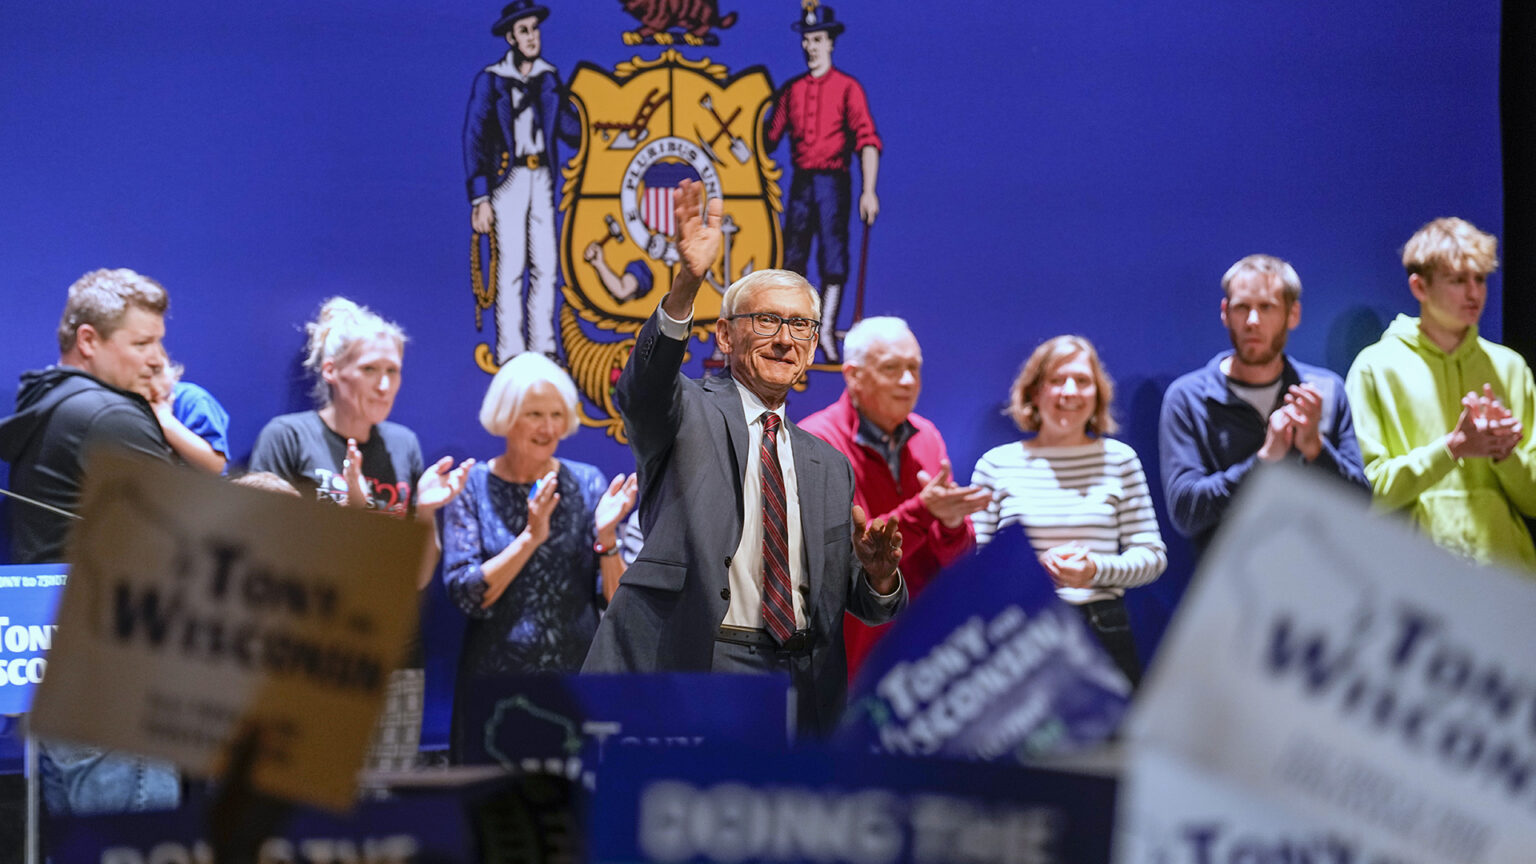 Tony Evers stands on a stage and waves with his right hand, with people standing in a line behind him clapping their hands with a large Wisconsin flag as a backdrop, while members of an audience hold up campaign signs.